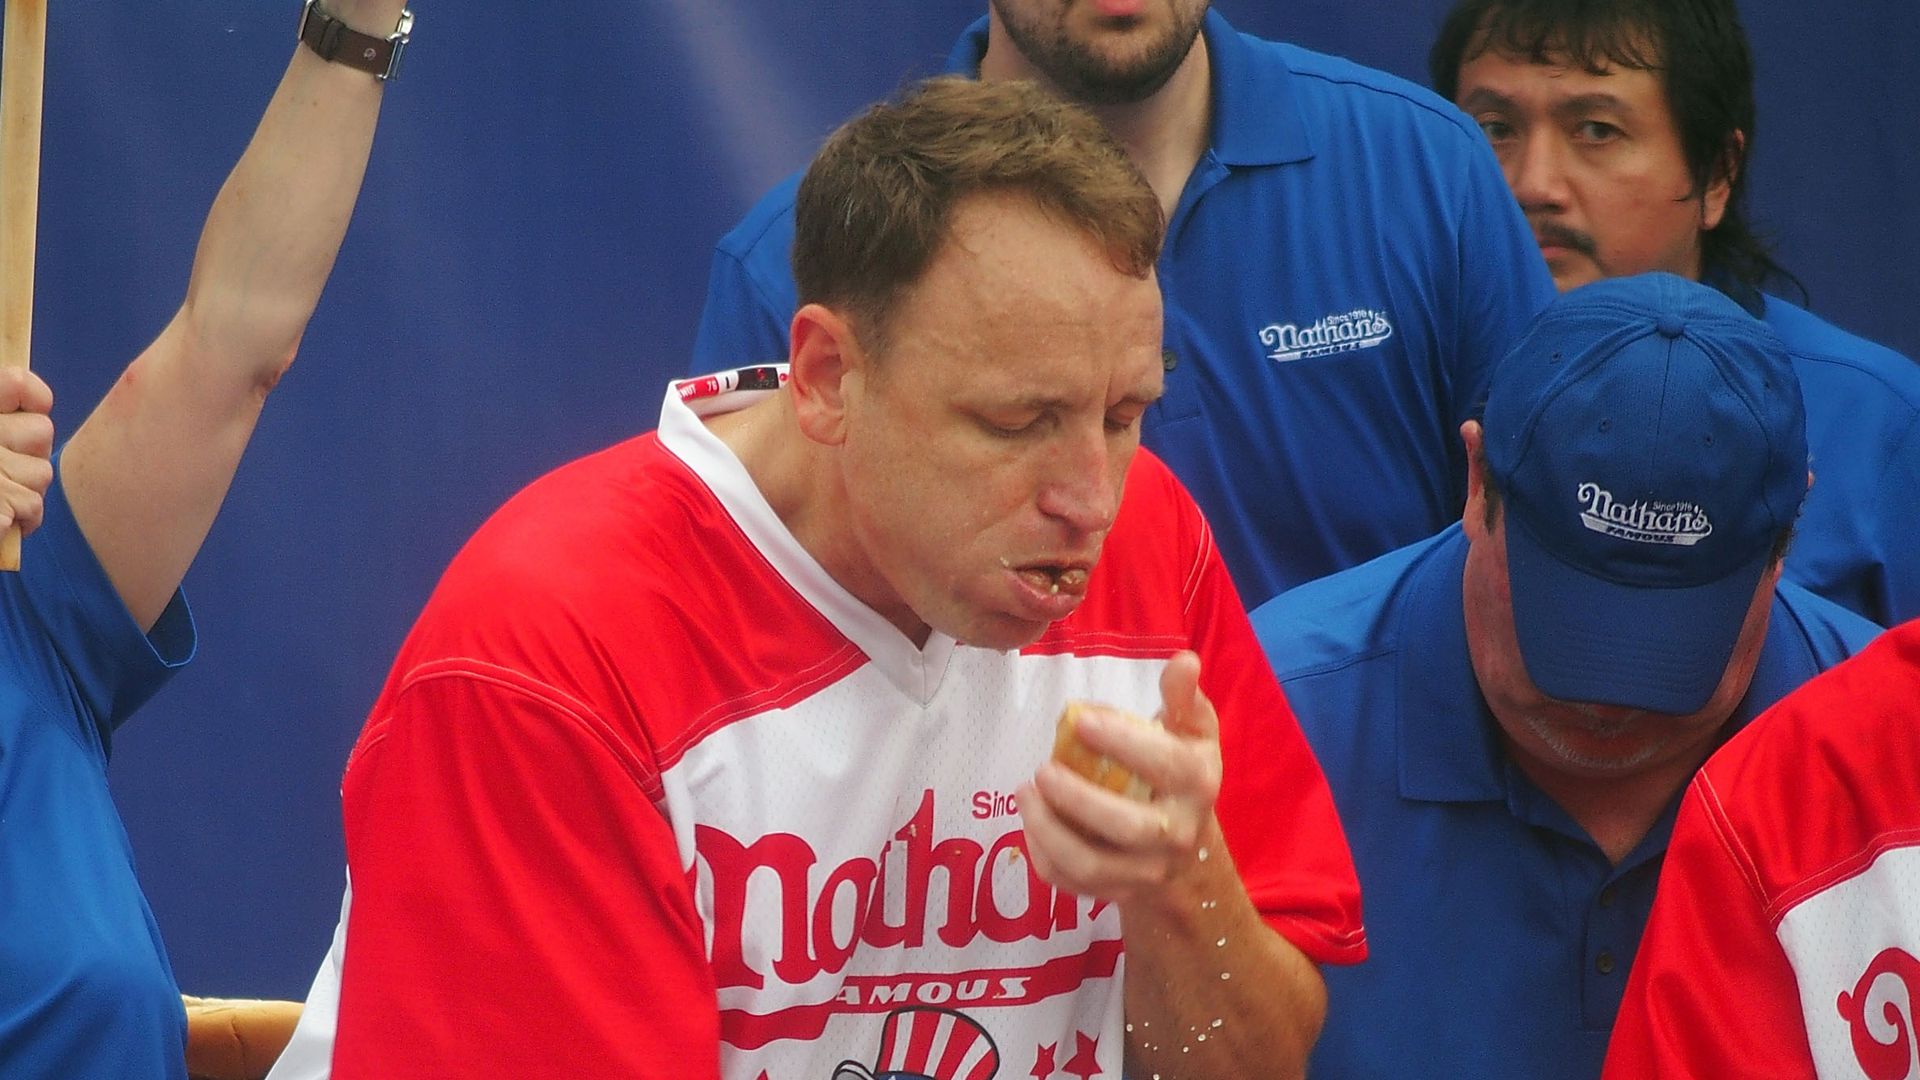 Joey Chestnut, the 16-time world hotdog eating champ, will not be competing in this year's Nathan's Famous Hotdog Eating Contest. Nathan's said that it's because he's chosen to promote another hotdog brand instead of theirs.